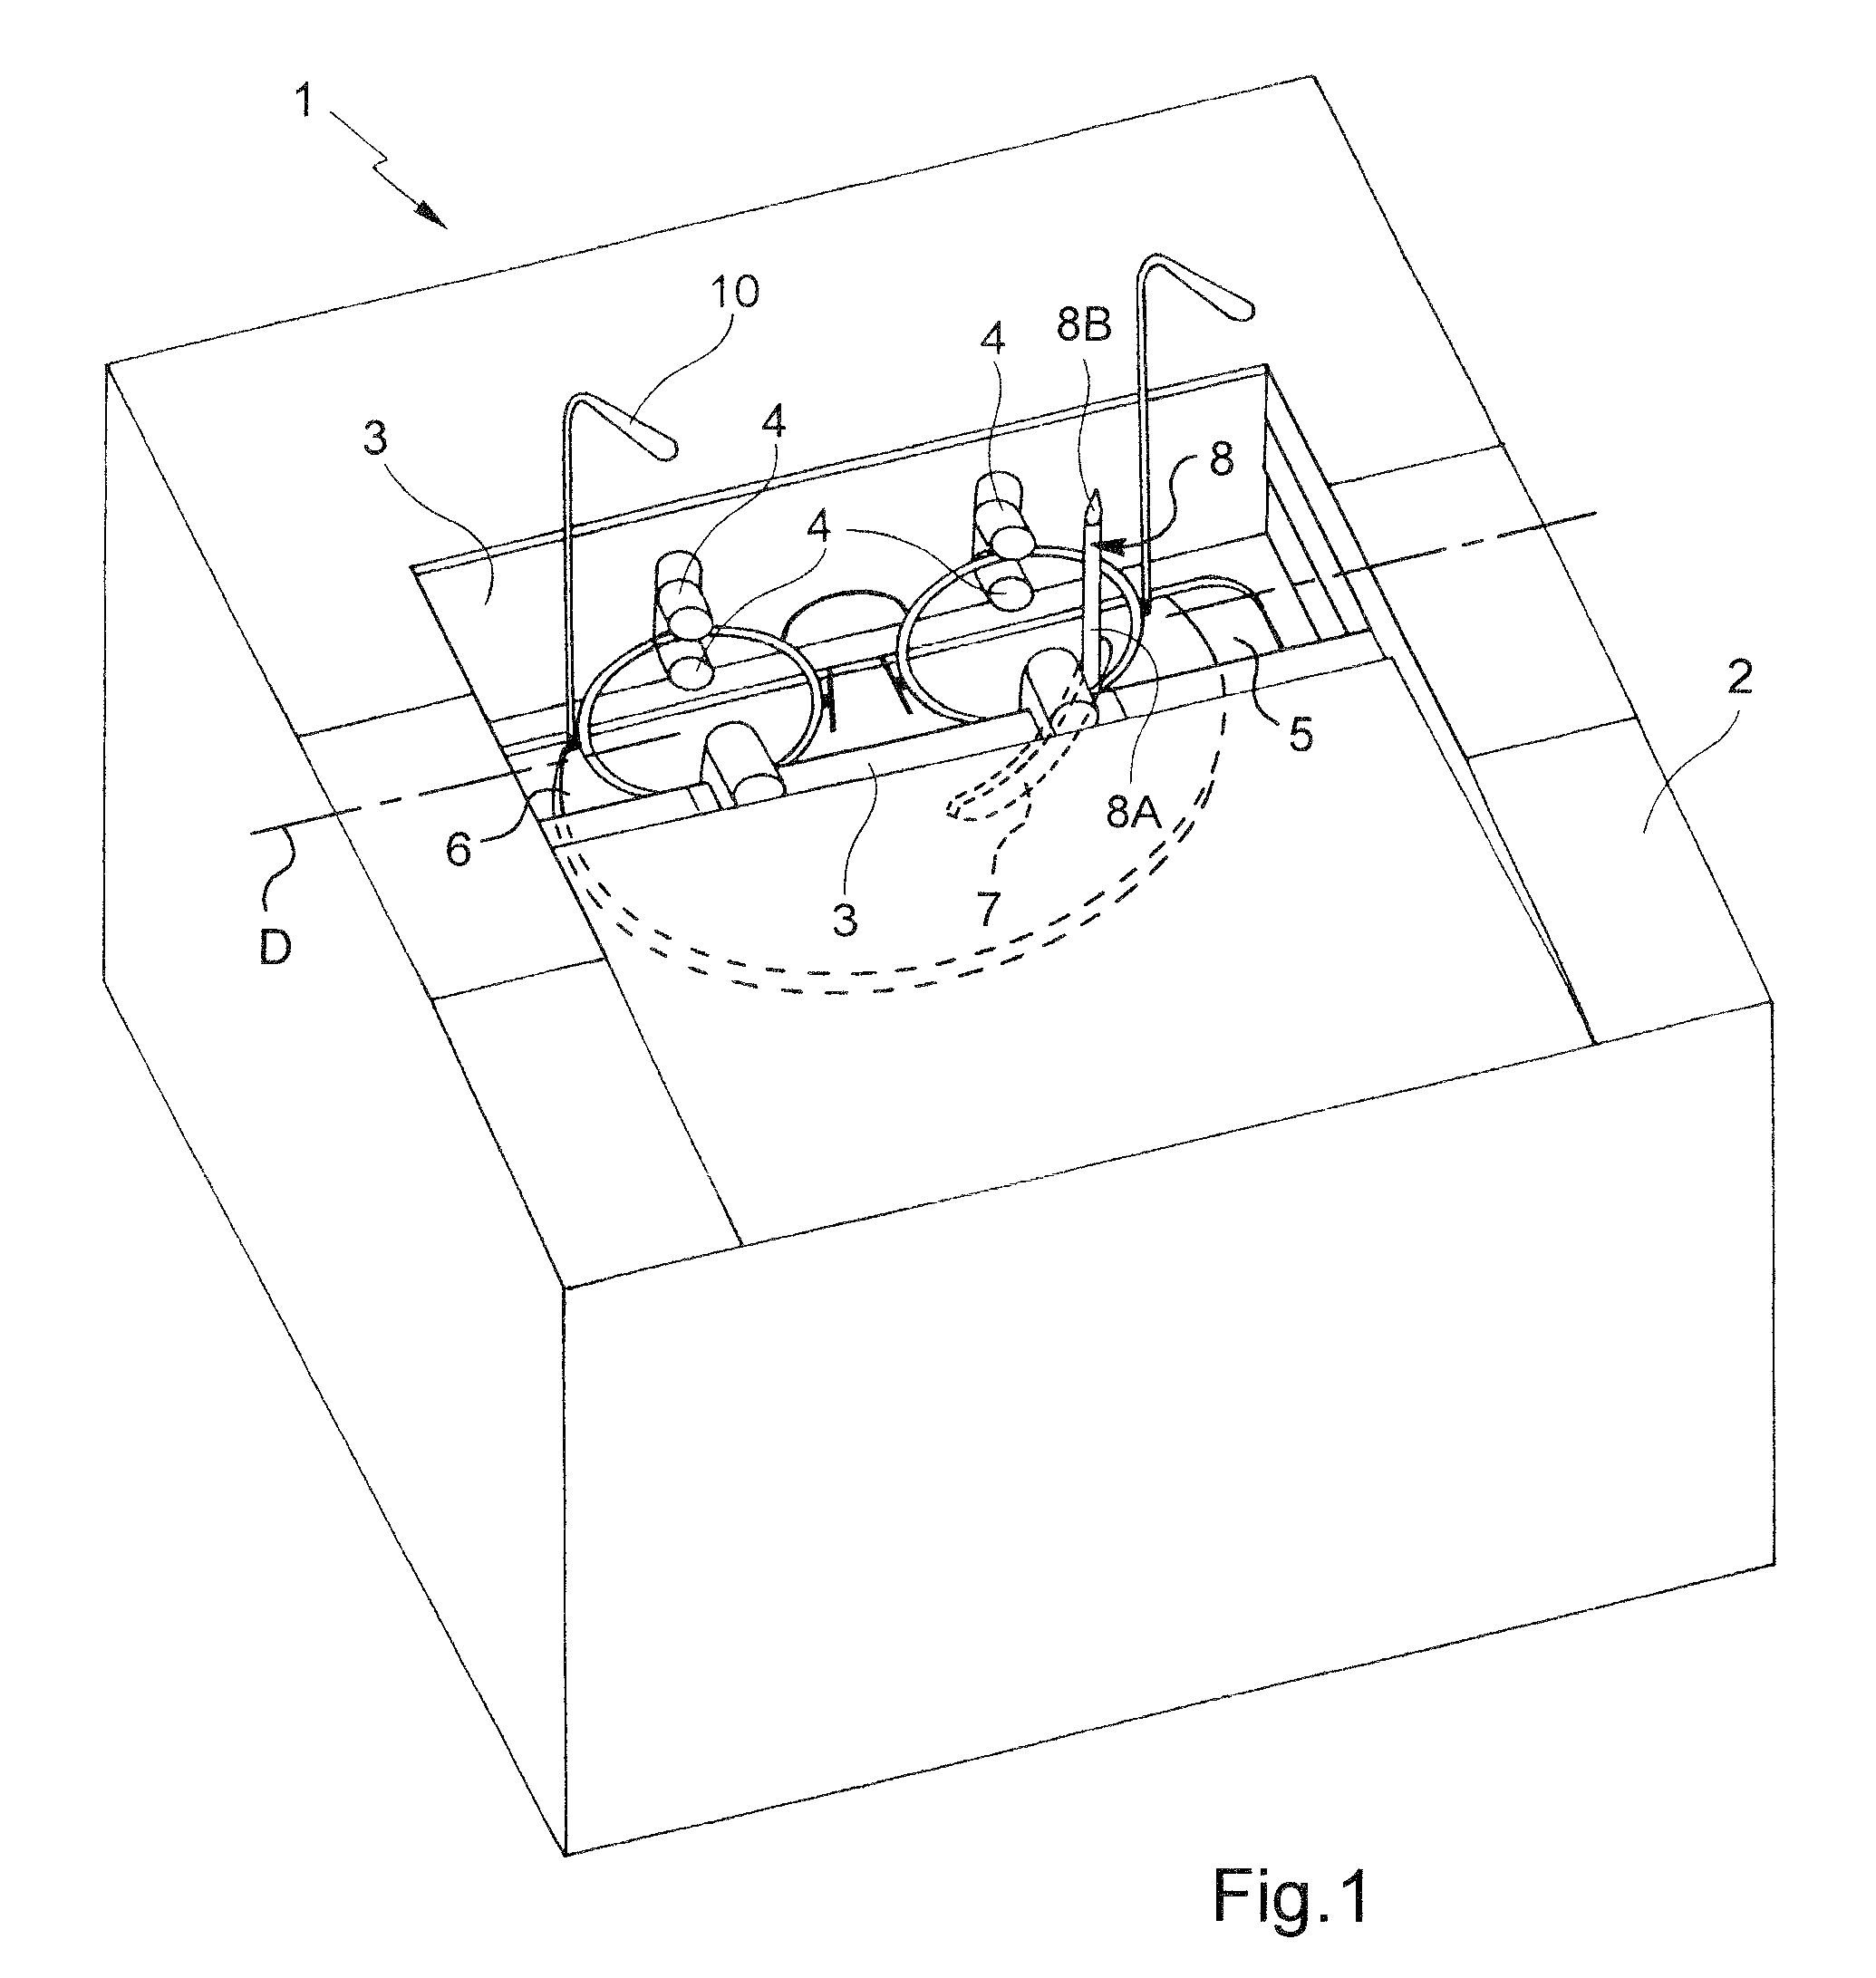 Method of controlling a feeler to read the bezel of an eyeglass frame